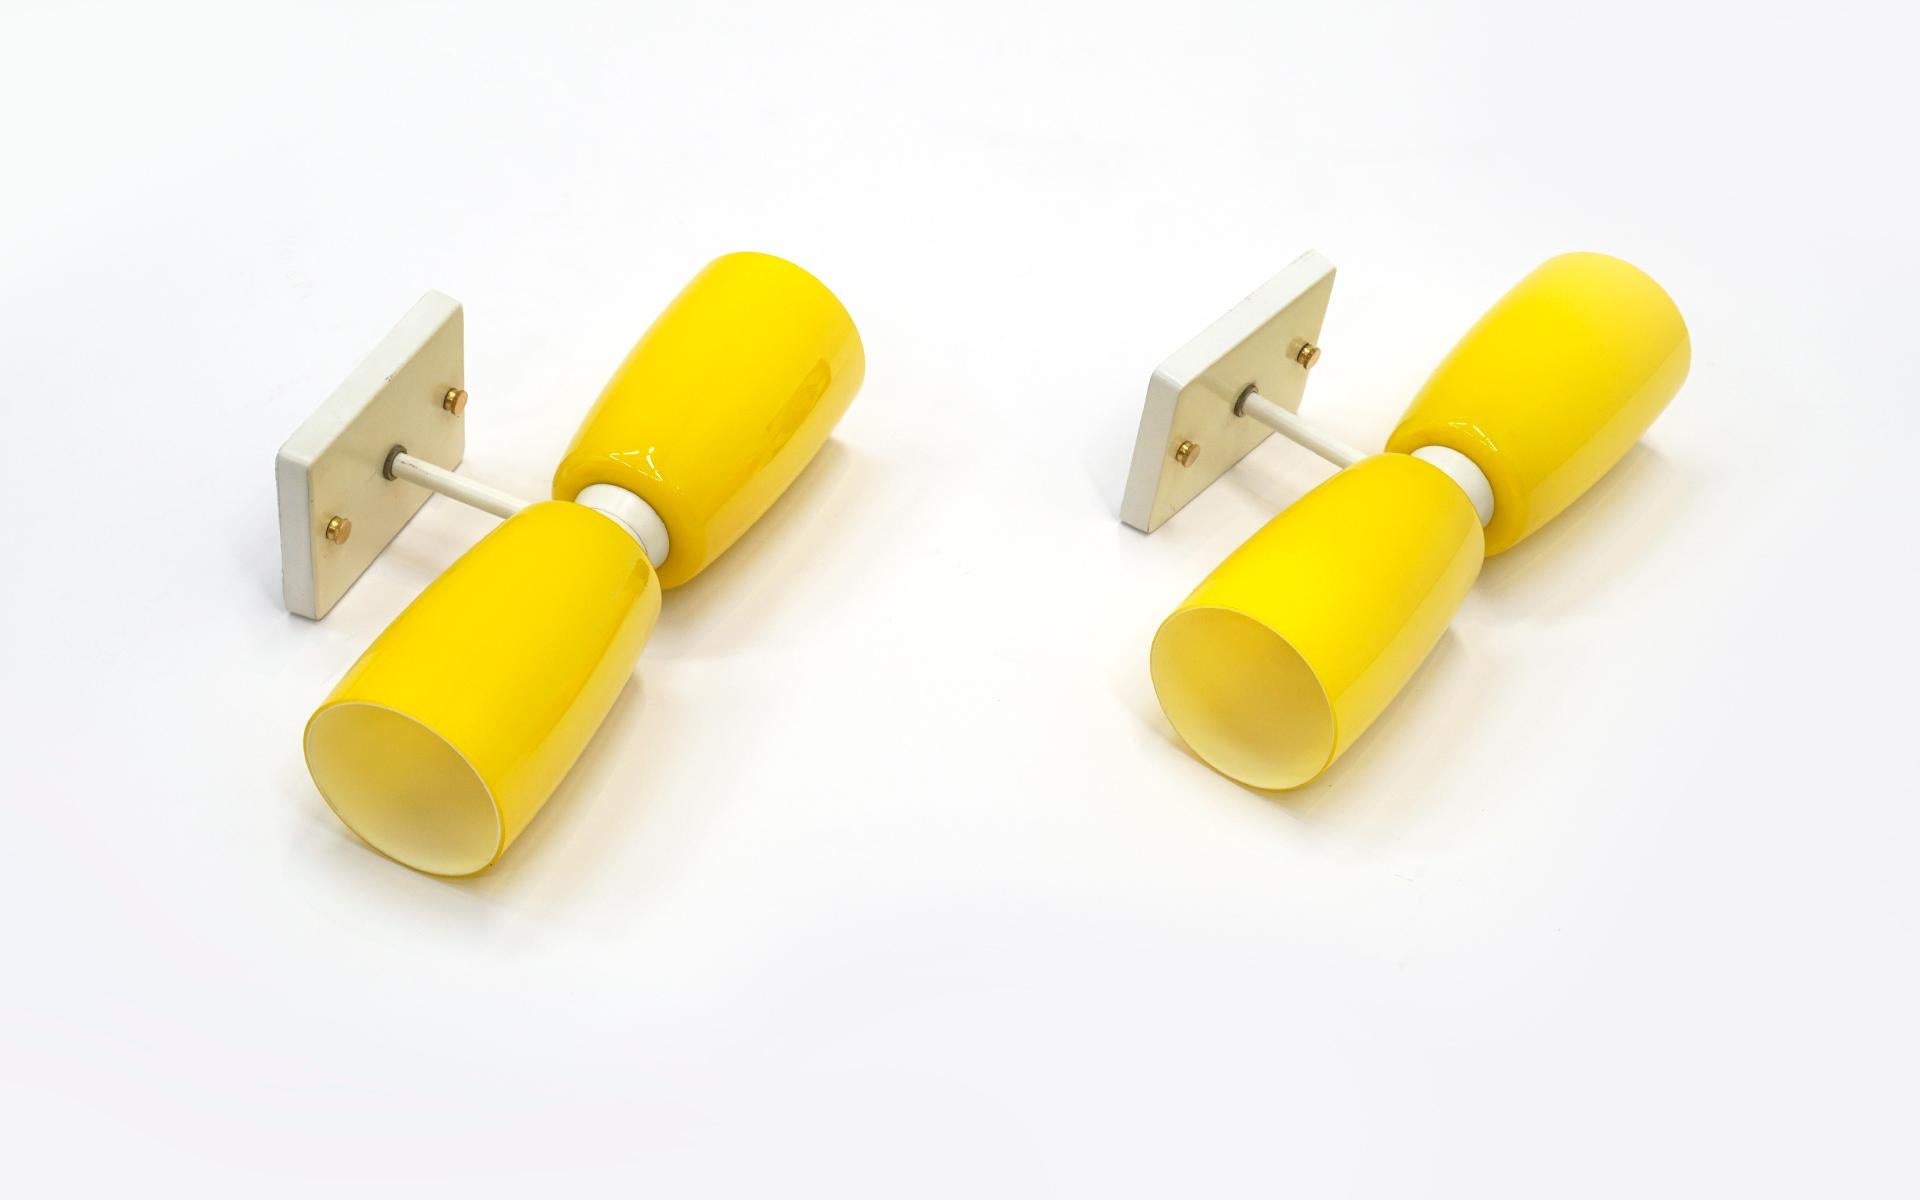 Two 1960s Prescolite wall sconces in yellow glass and white fixture. Original with no scratches or chips to the glass. A rare opportunity to own a pair in such pristine condition.